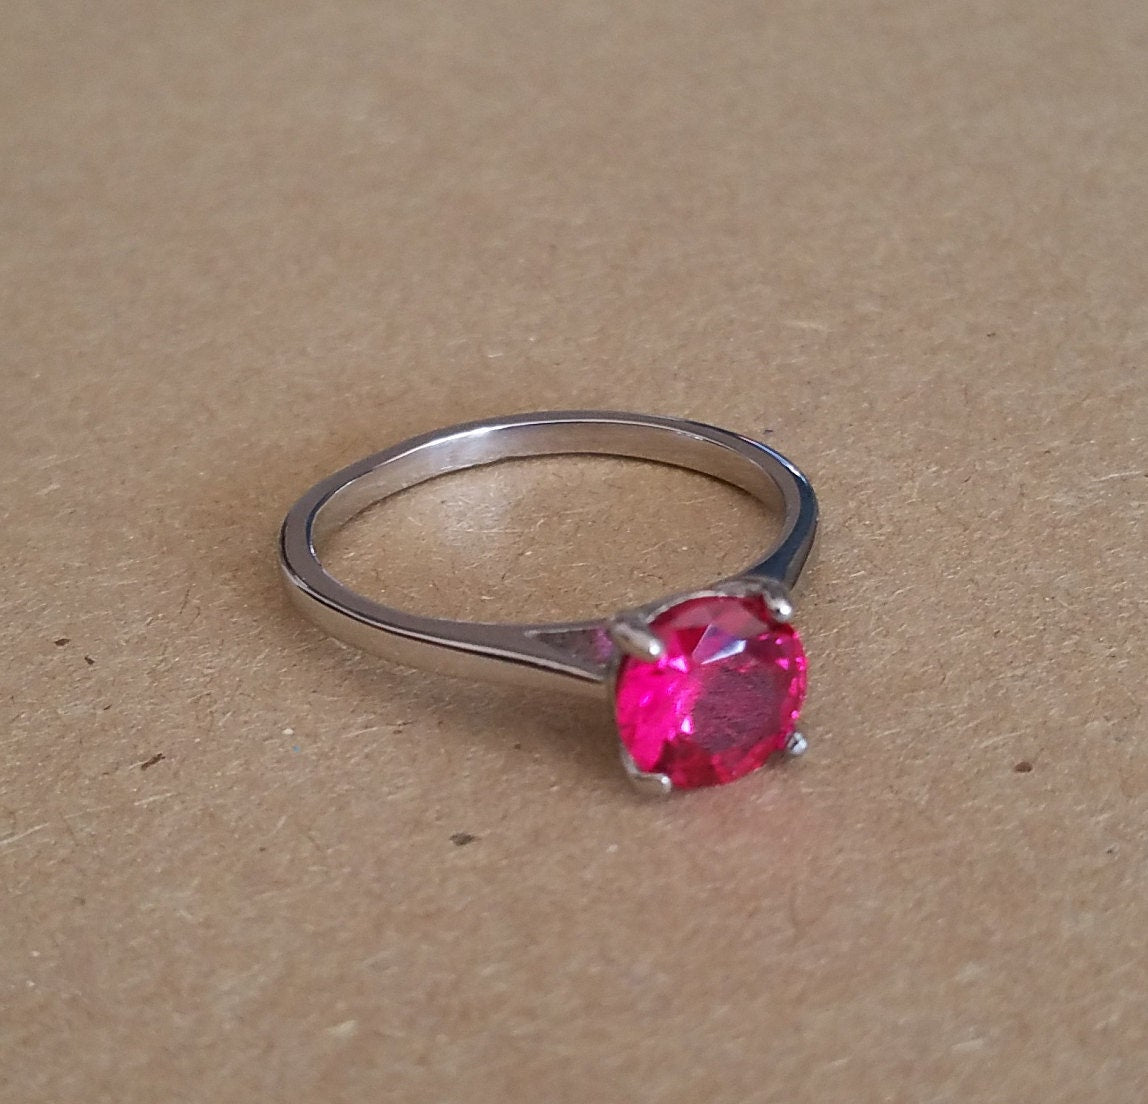 1.5ct Lab Pink Sapphire solitaire ring in Titanium or White Gold - engagement ring - wedding ring - handmade ring